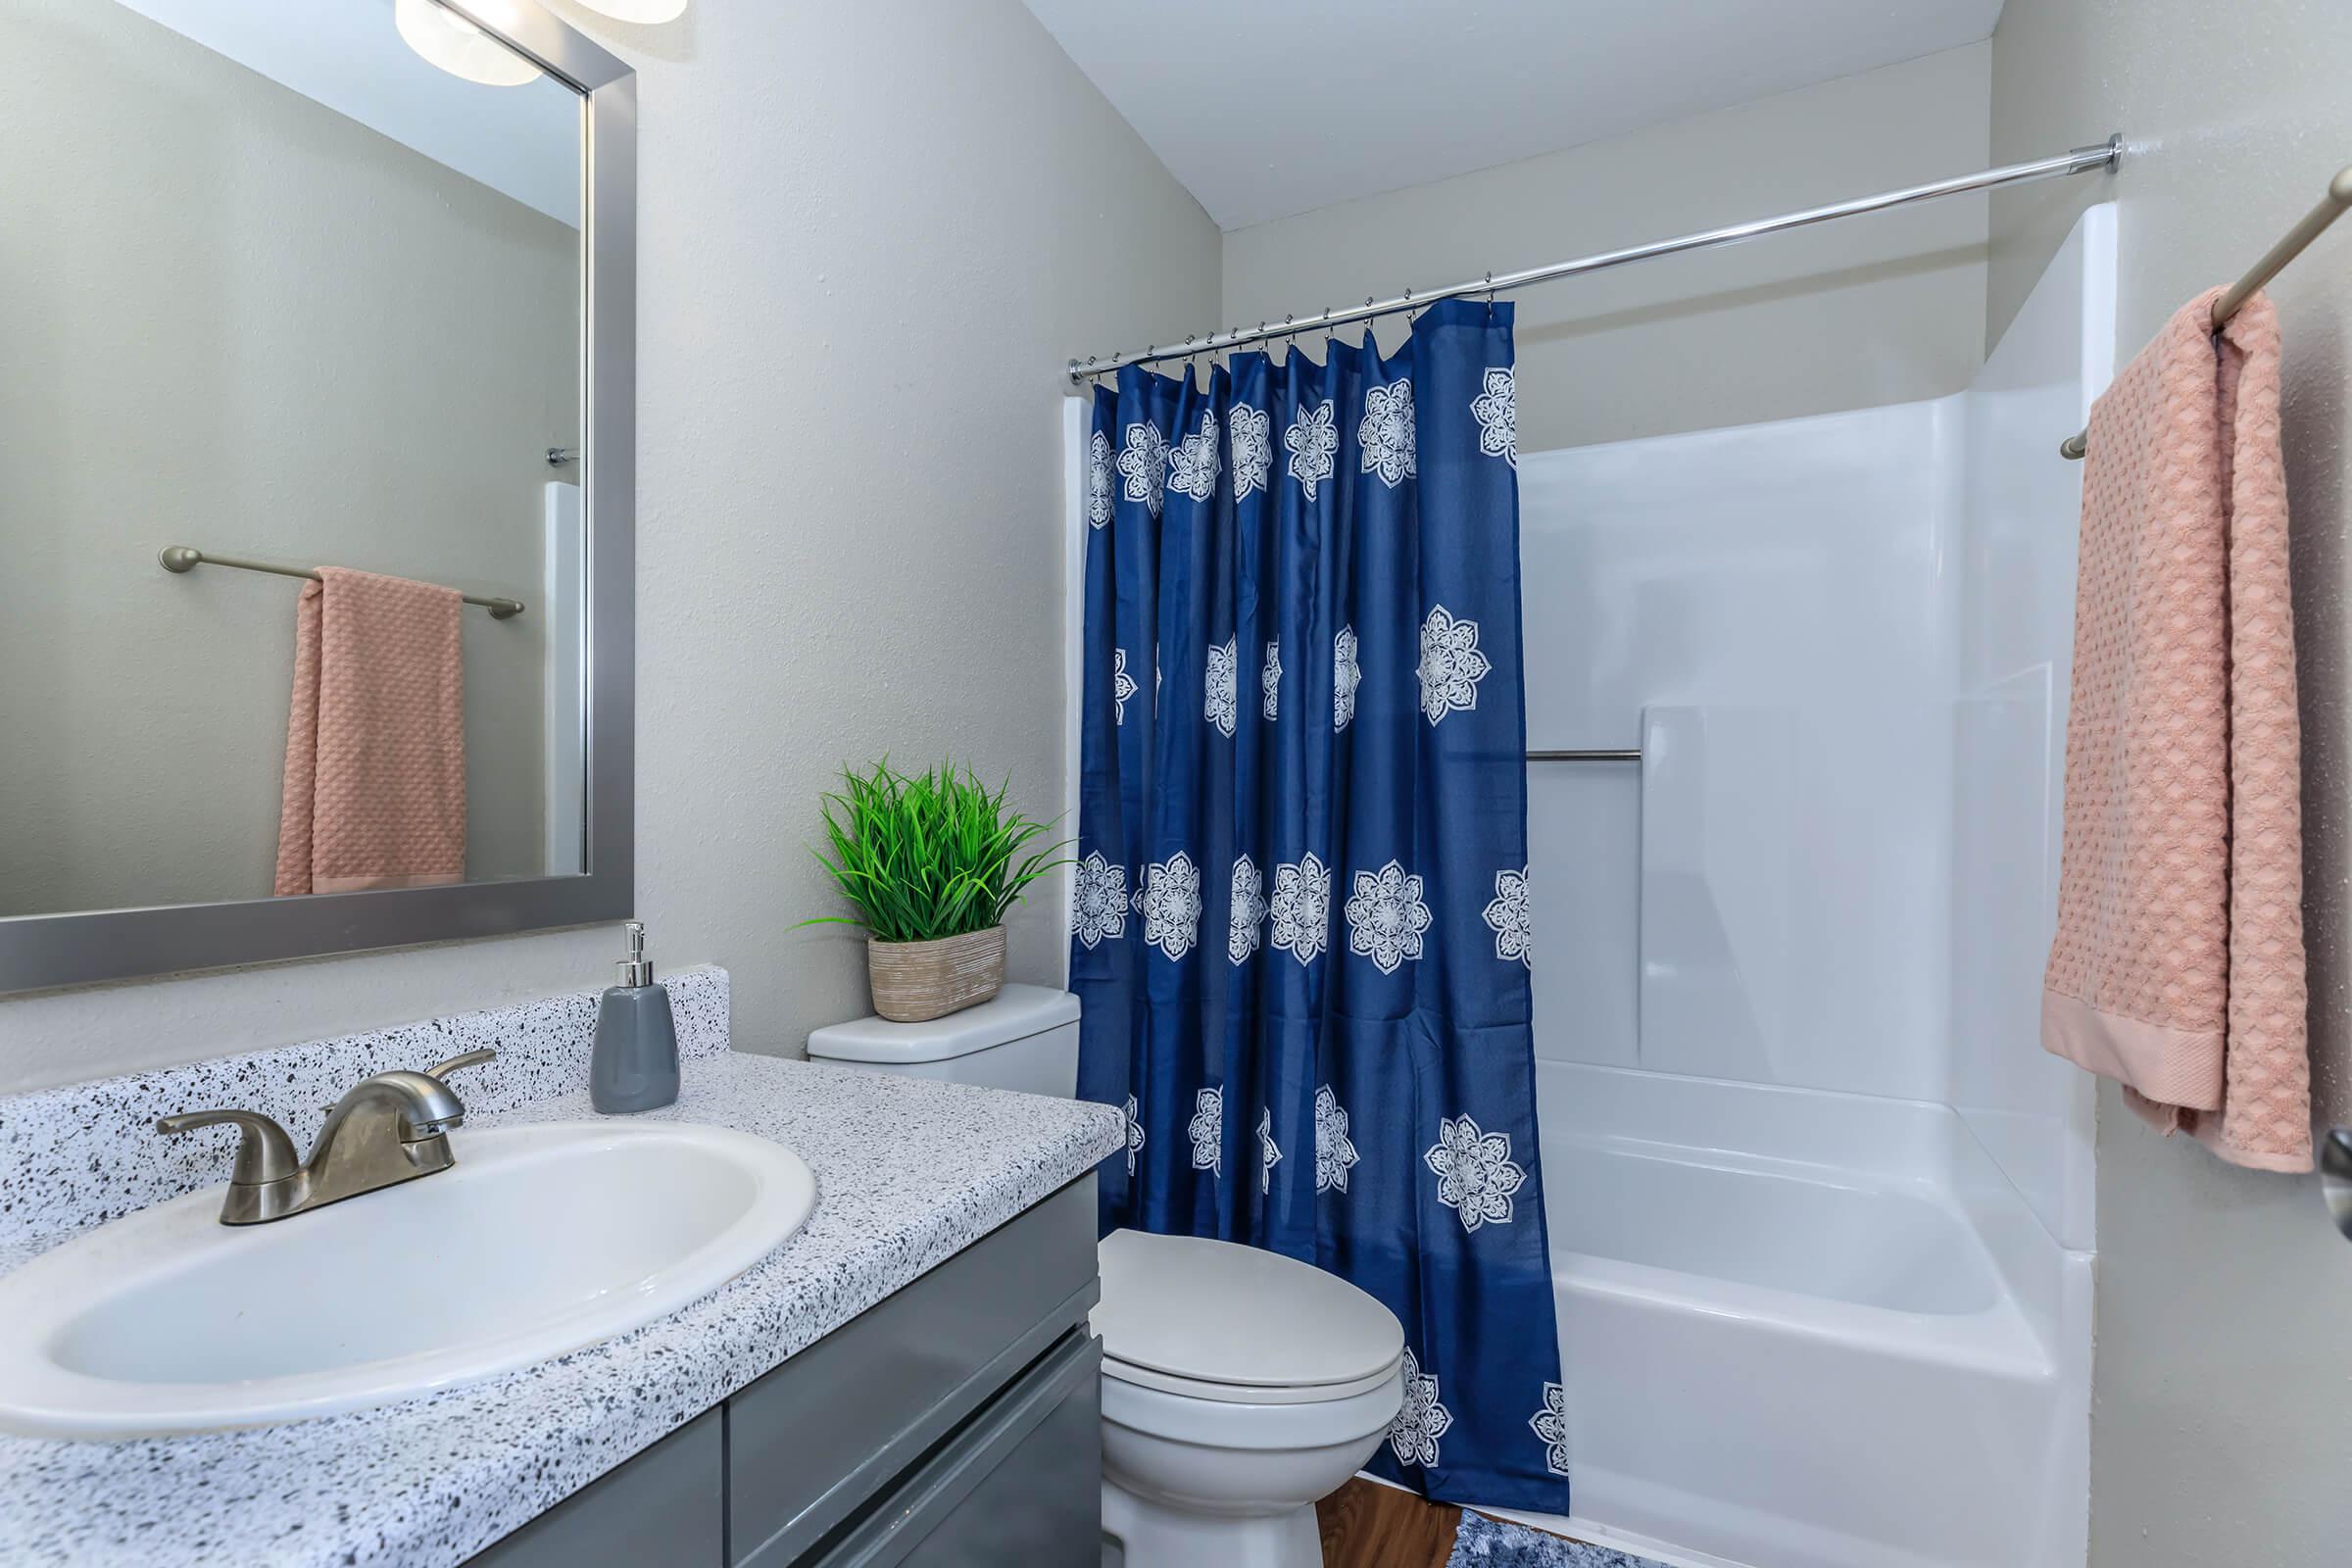 WASH. RINSE. REPEAT IN TWO AND A HALF BATHROOMS AT THE TOWNHOMES ON THREE